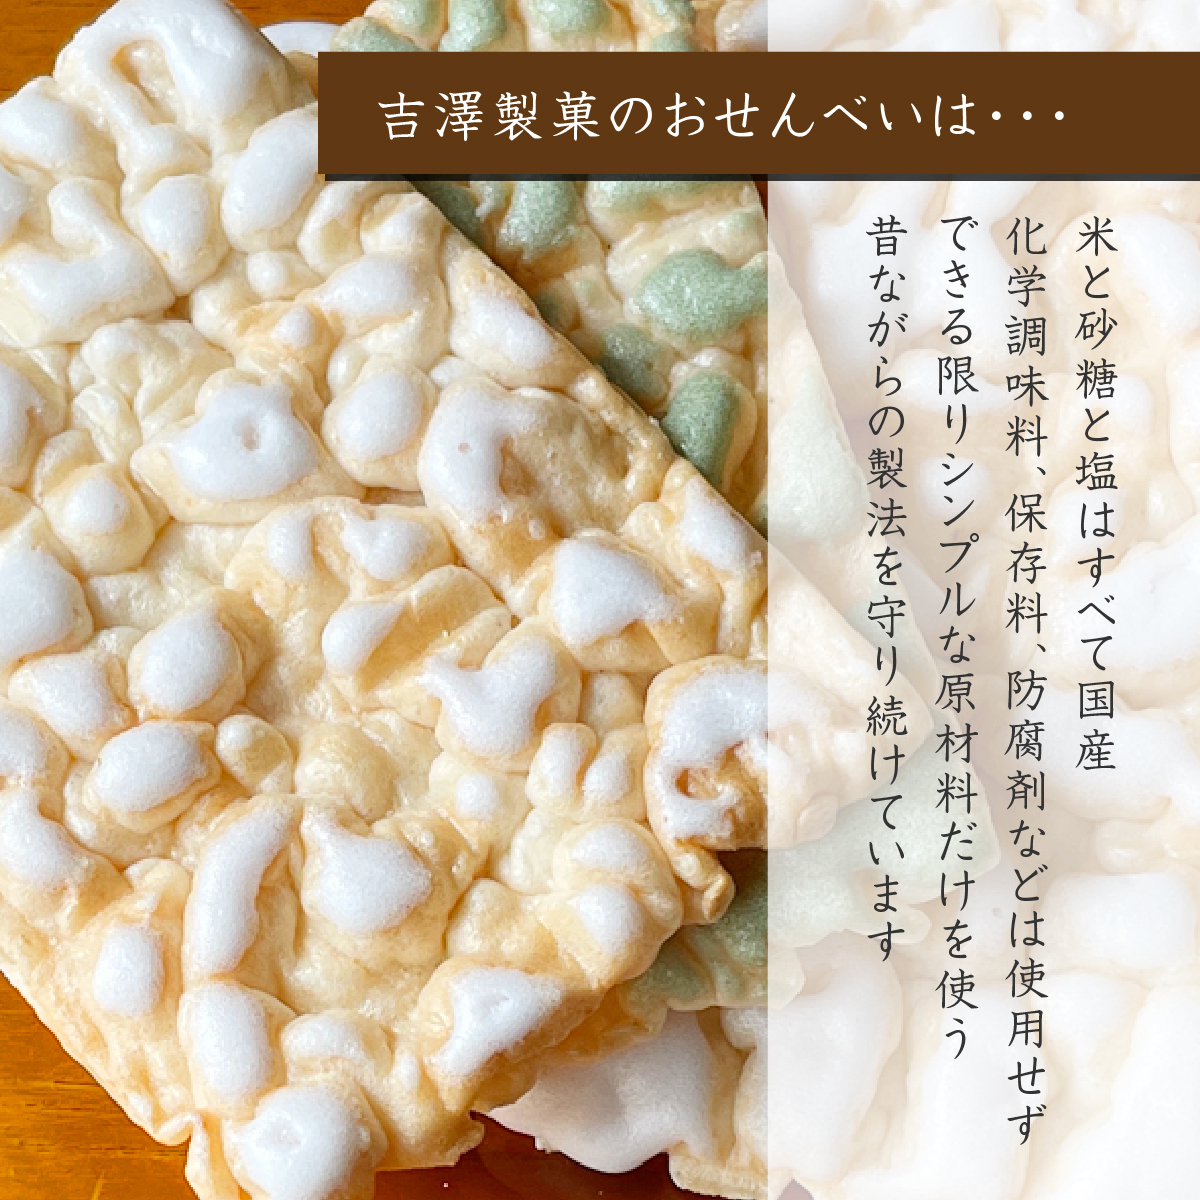  free shipping .. confectionery domestic production rice use plain powdered green tea .. wave 9 sheets entering . mochi rice cracker rice . missed taste Niigata 